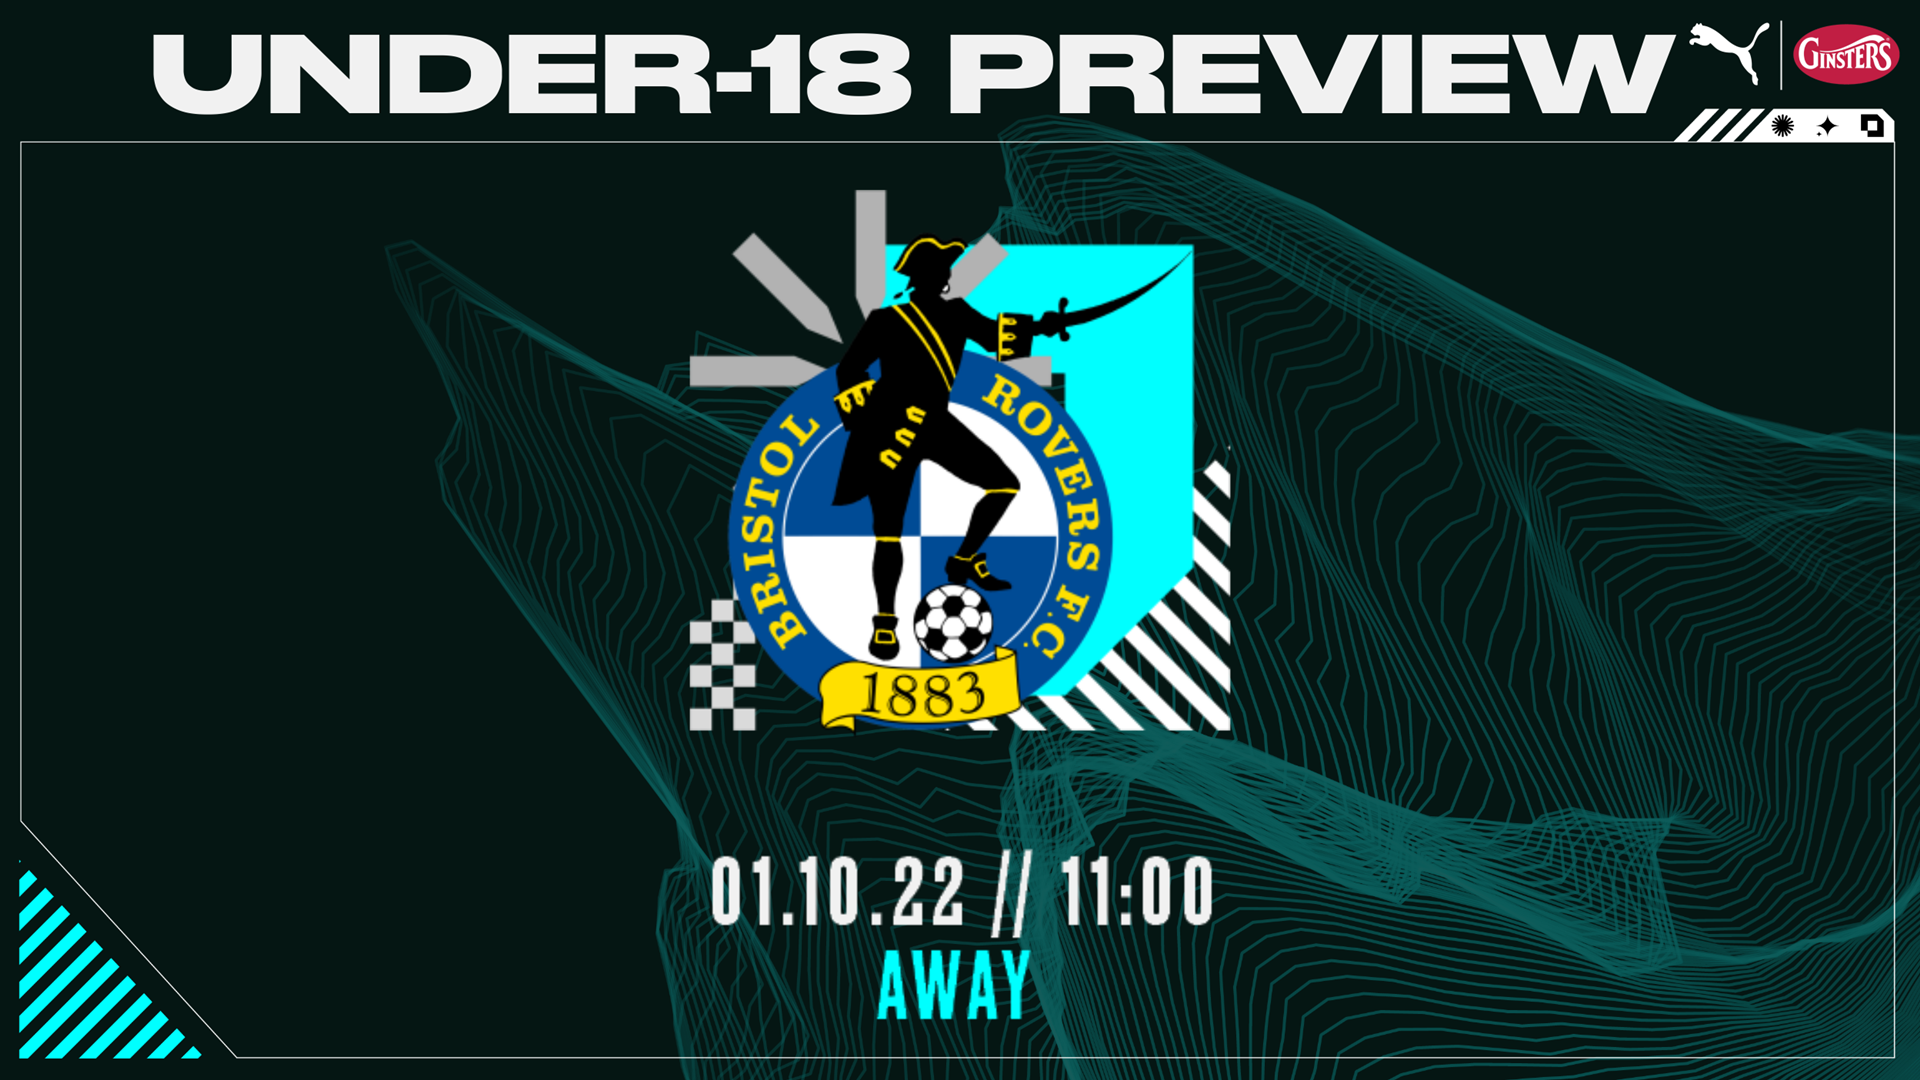 Under-18 Preview